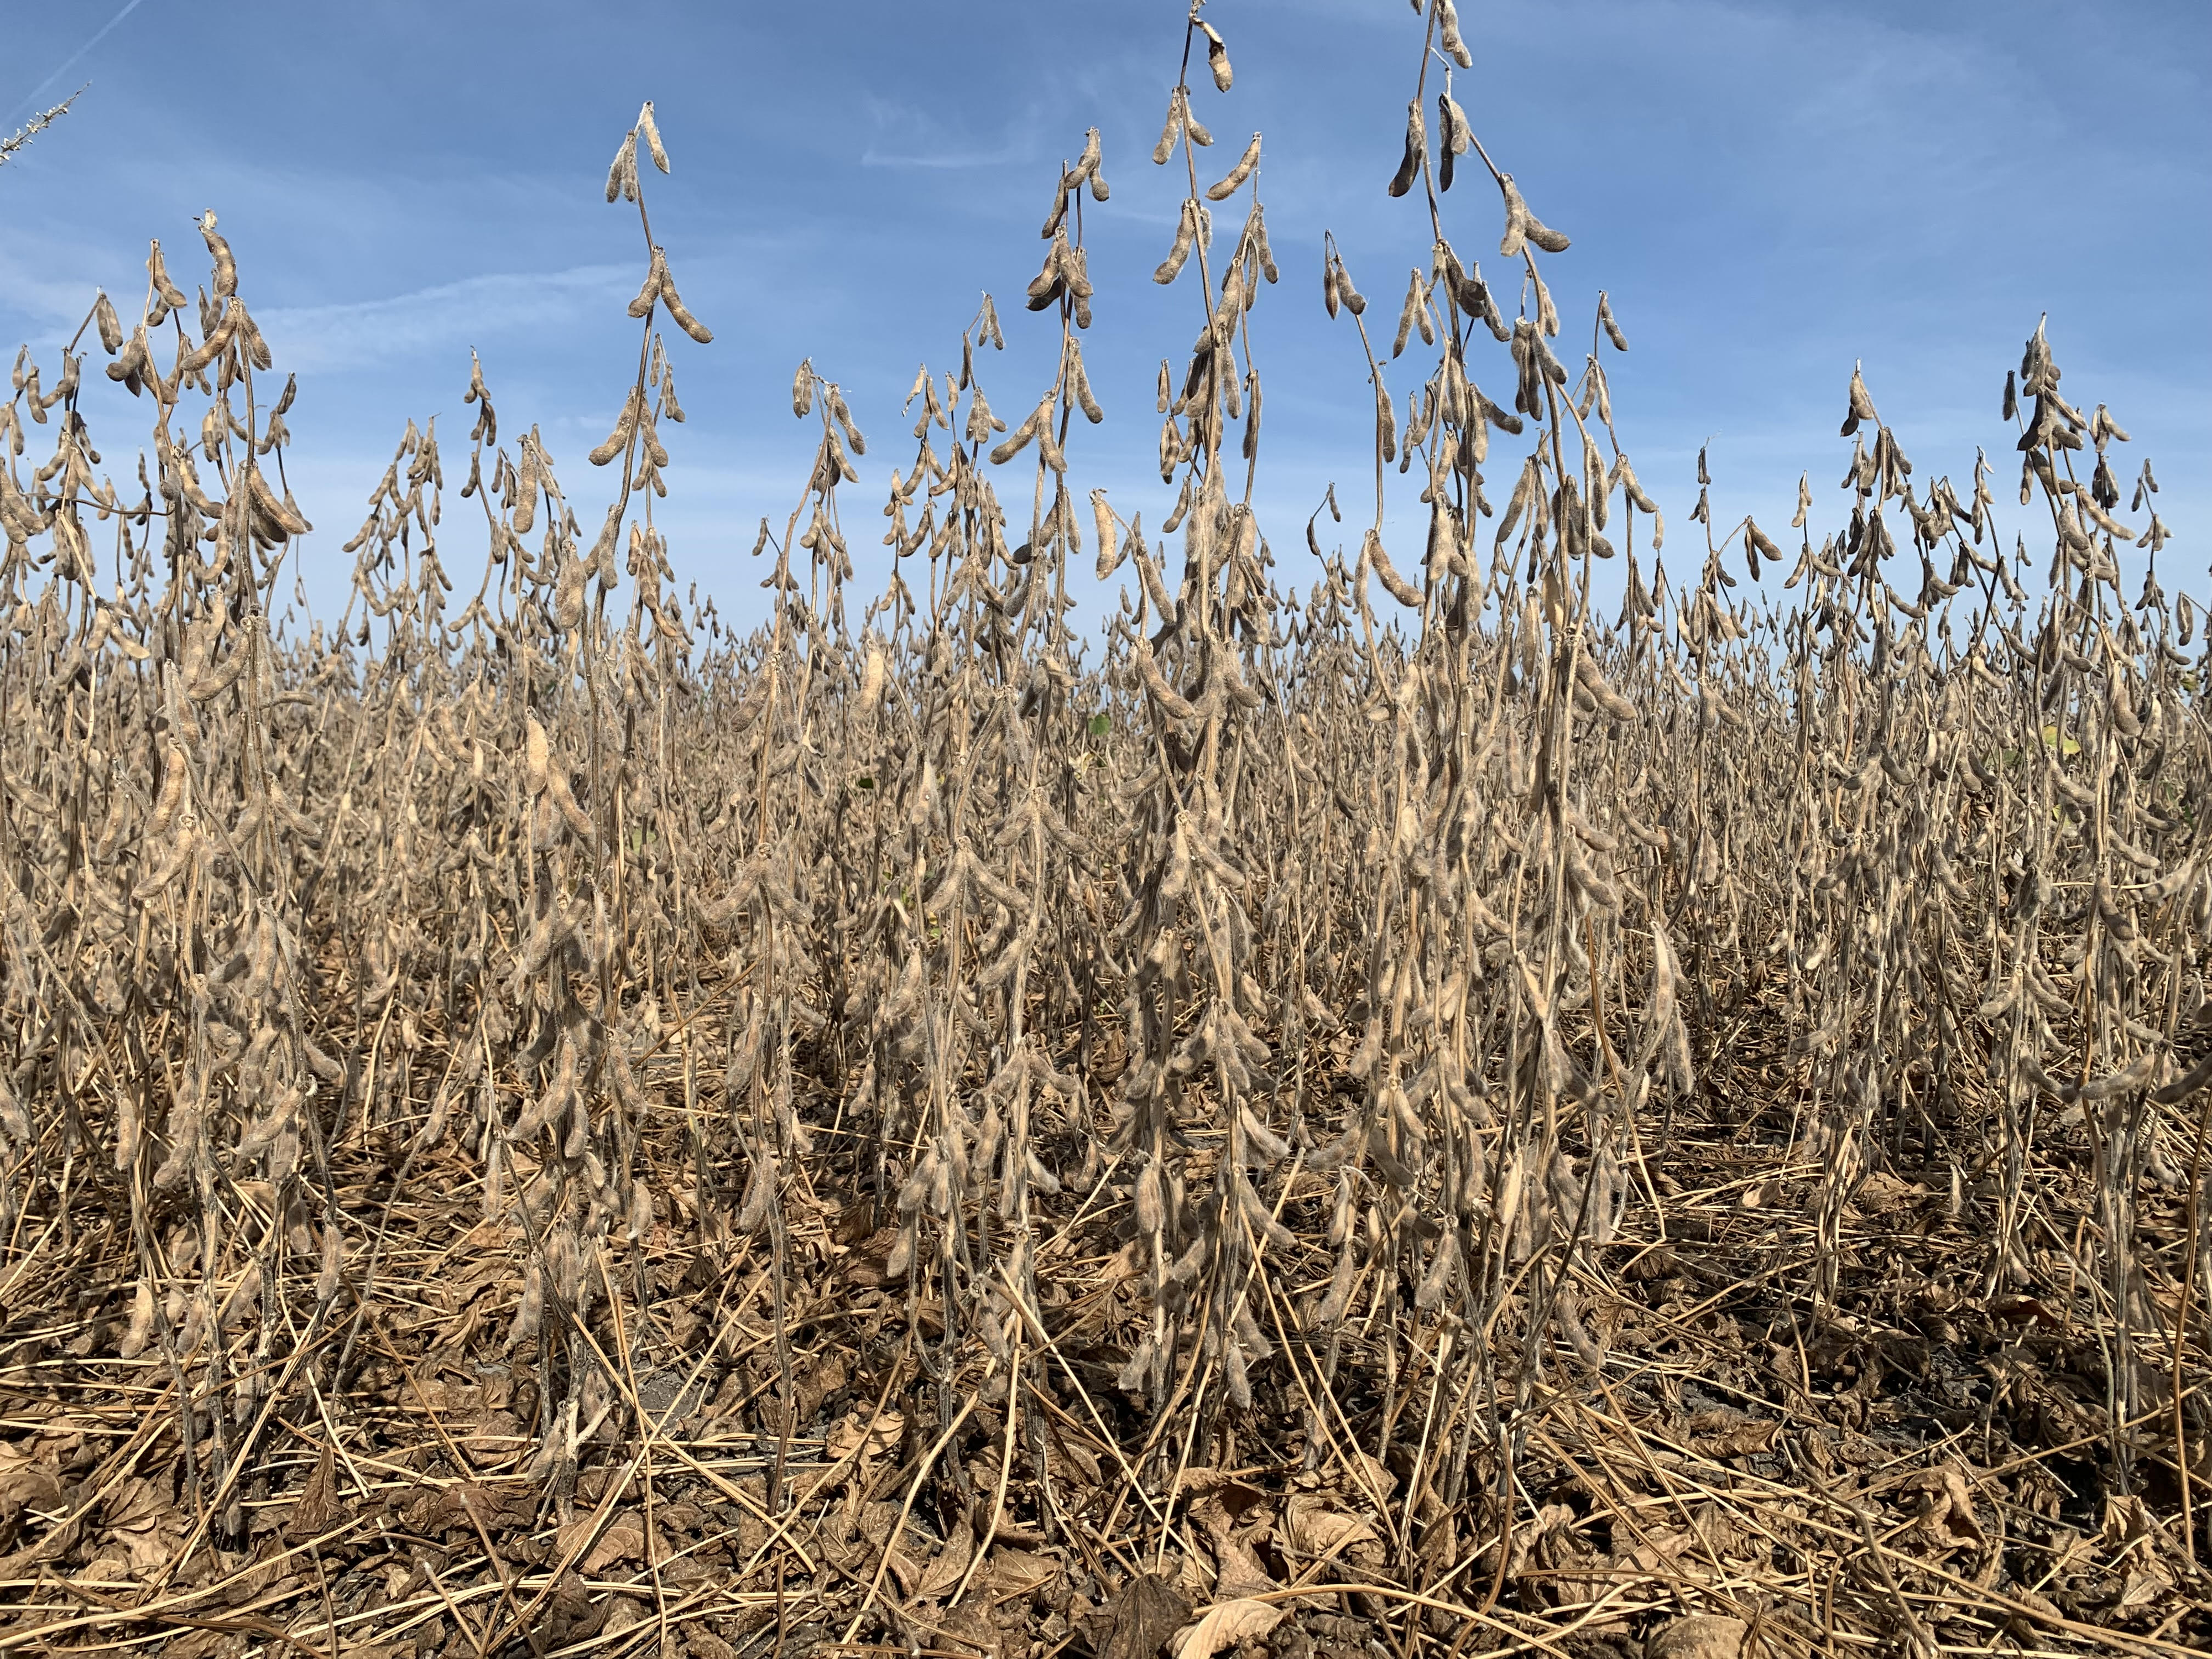 Morning Ag News, October 15, 2021: Research being done on the benefits of switching up the typical corn-soybean rotation